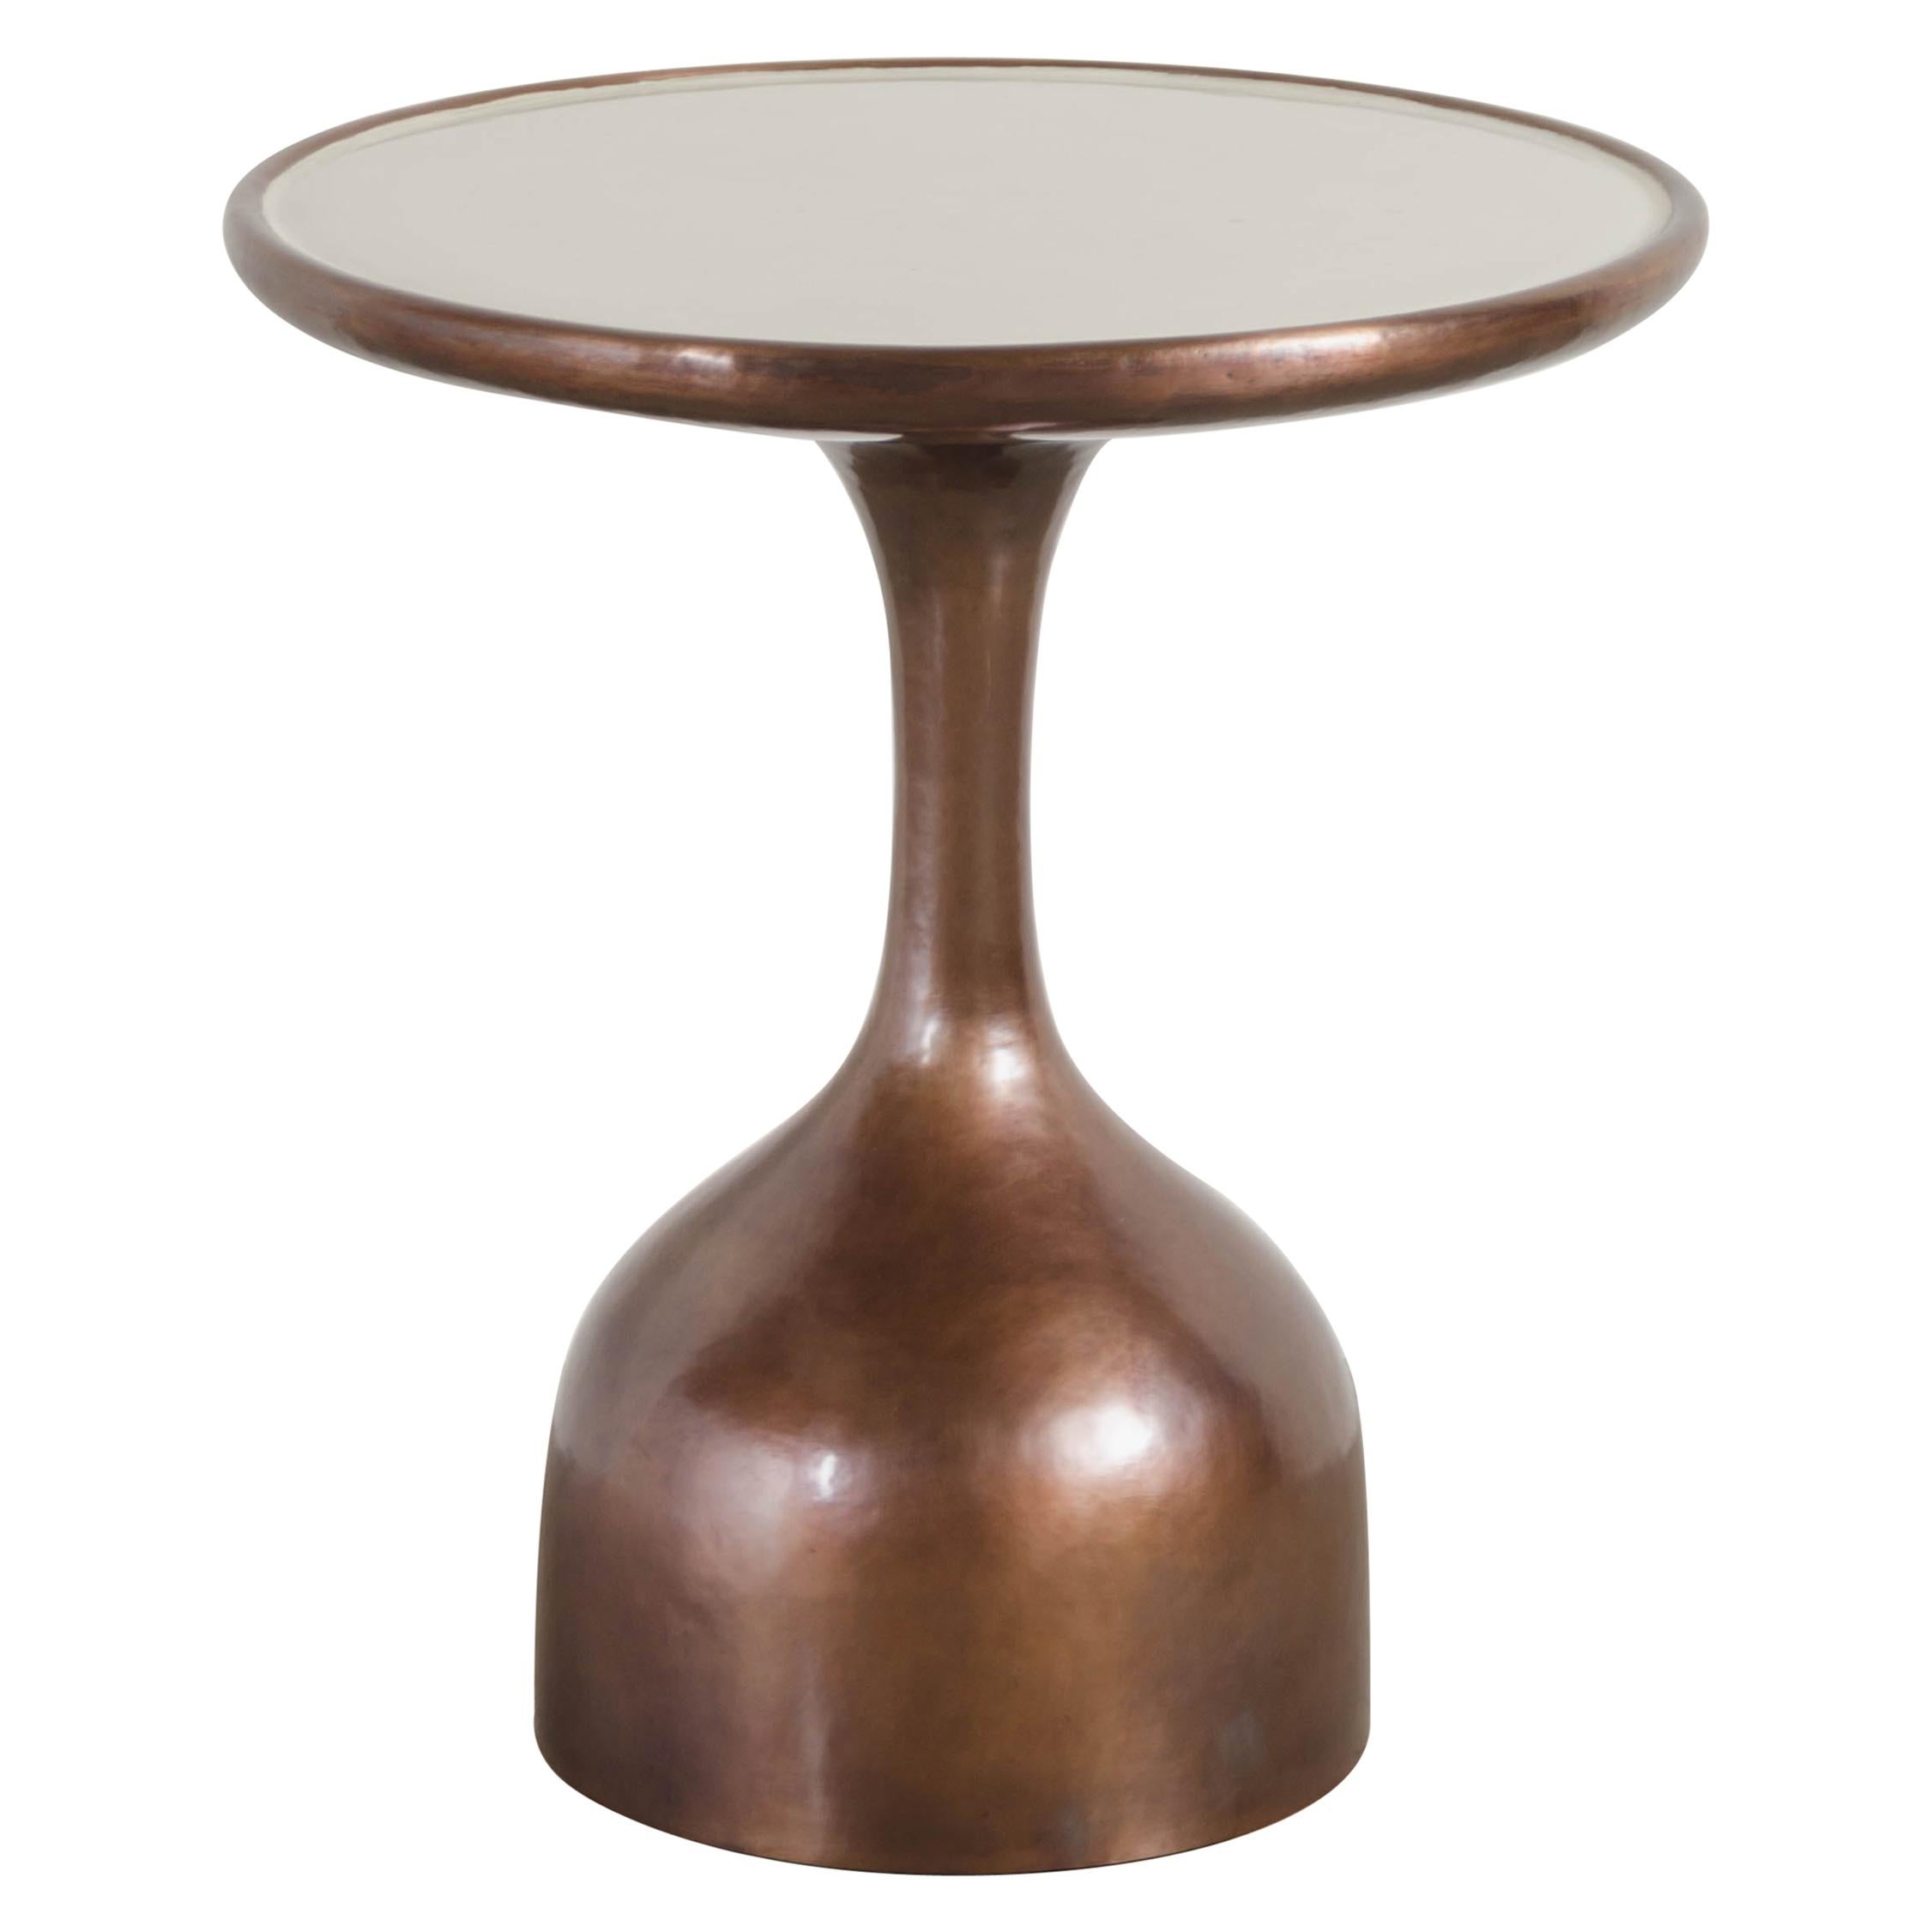 Le Verre Table with Cream Lacquer Top by Robert Kuo, Hand Repousse, Limited